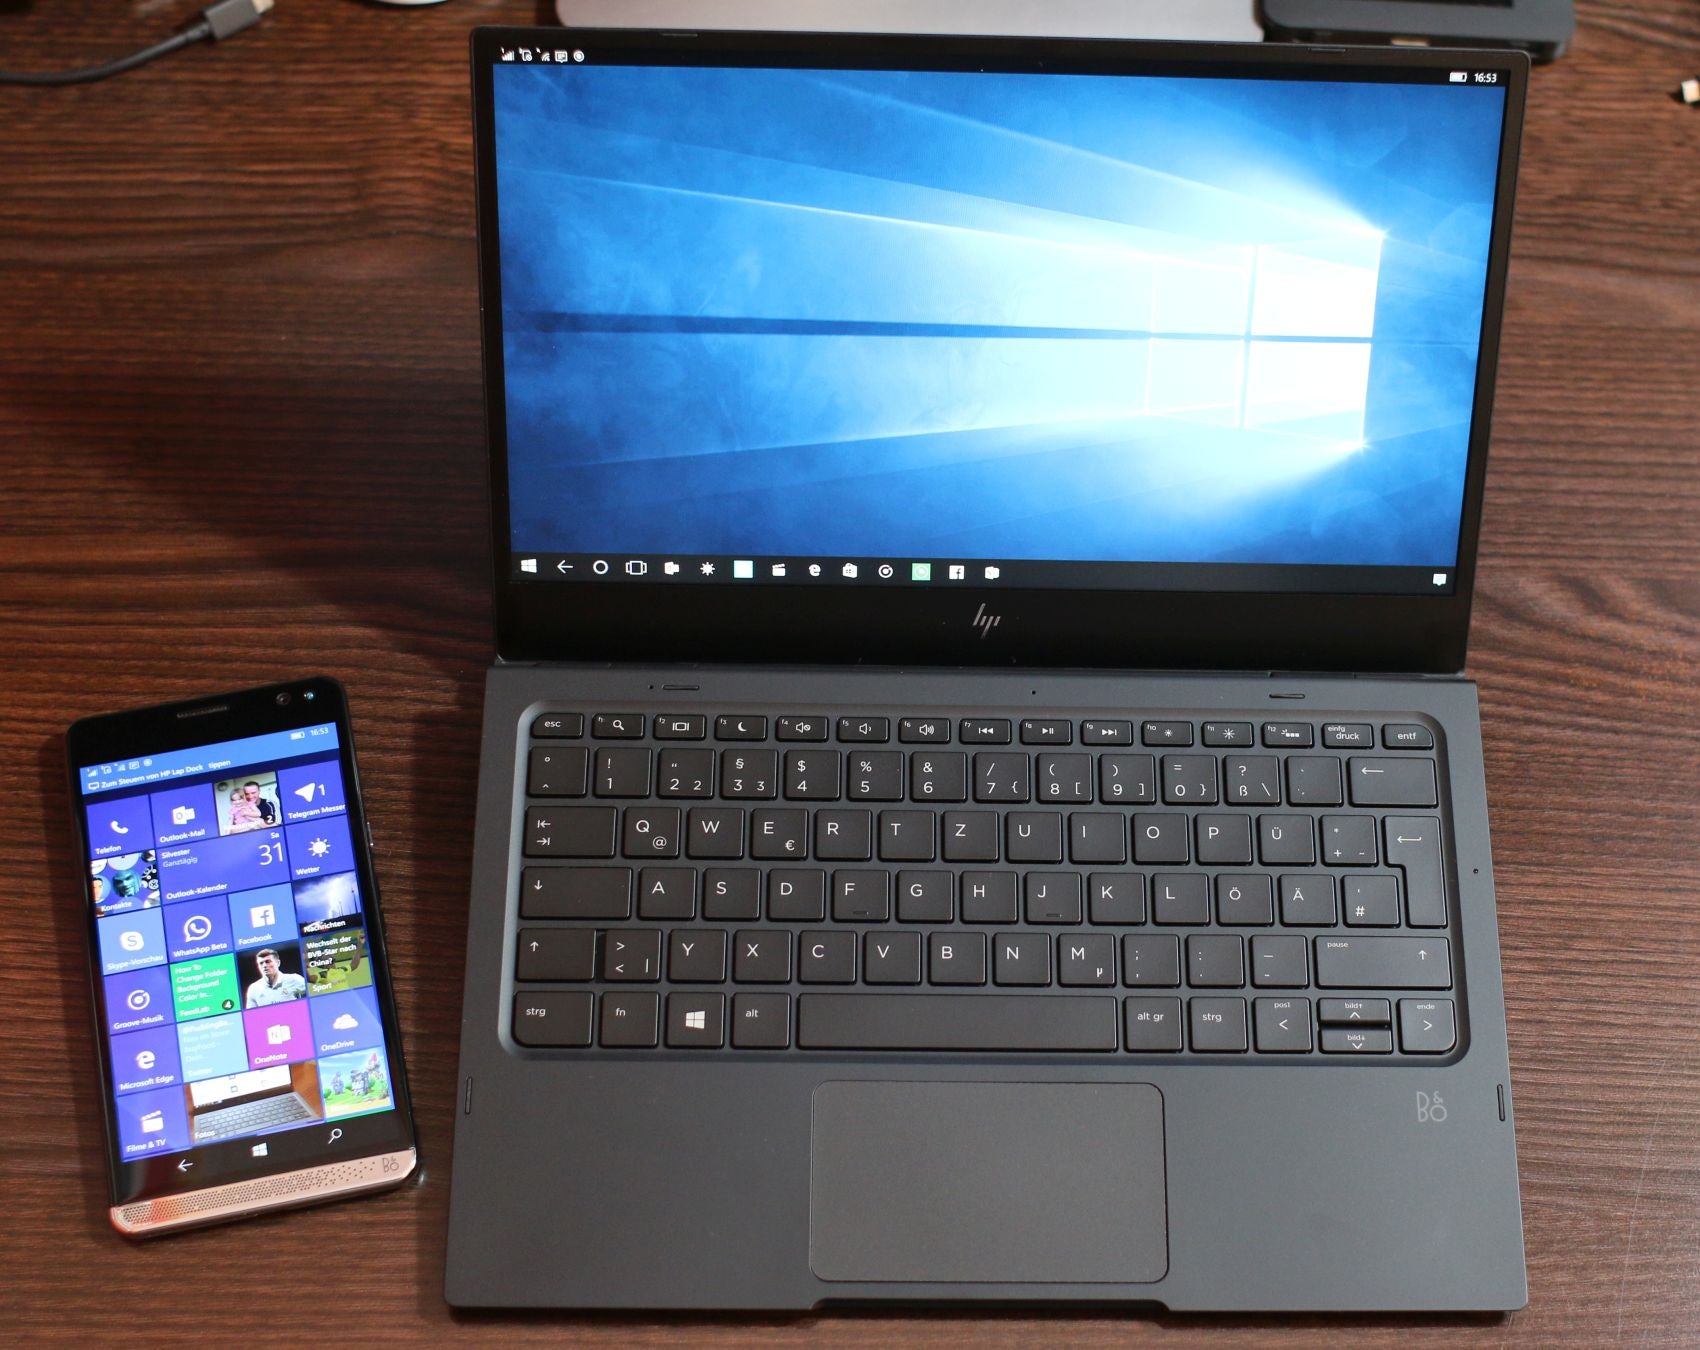 The HP Elite x3 at left with the current version of the Lap Dock at right - New Lap Dock for the HP Elite x3 sequel made an unassuming appearance at MWC